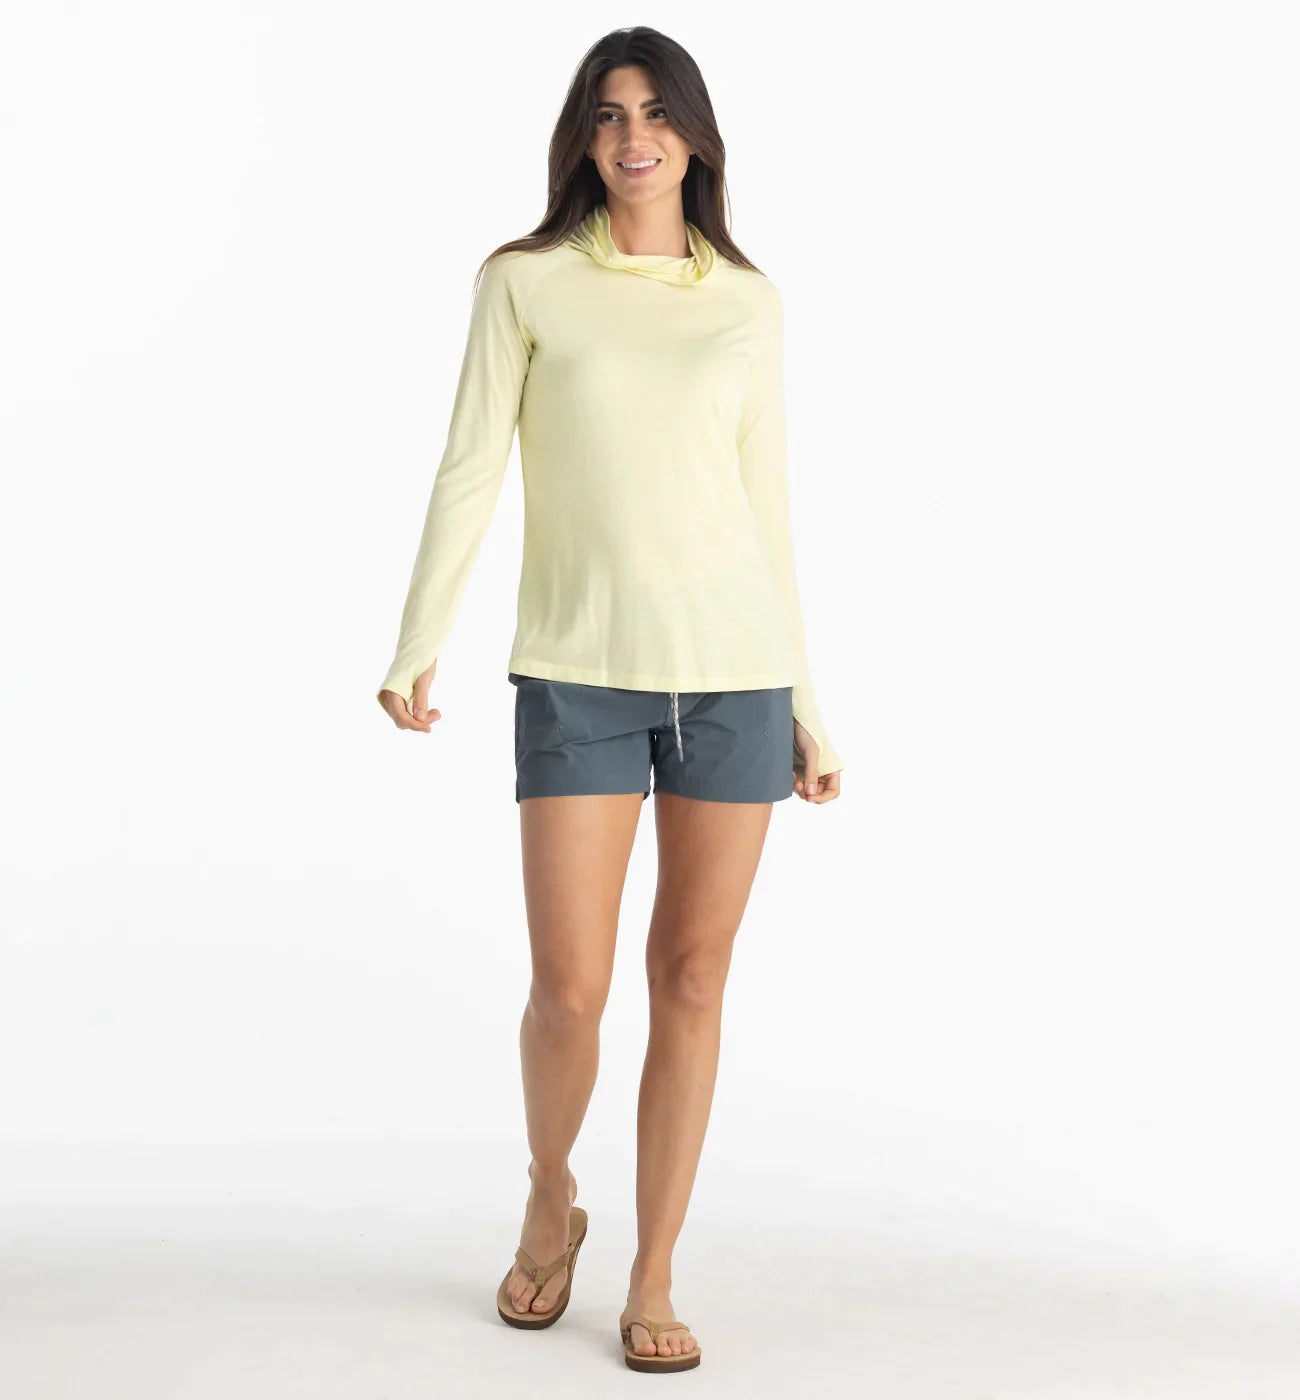 Free Fly Women's Lightweight Hoodie II - Washed Citrus